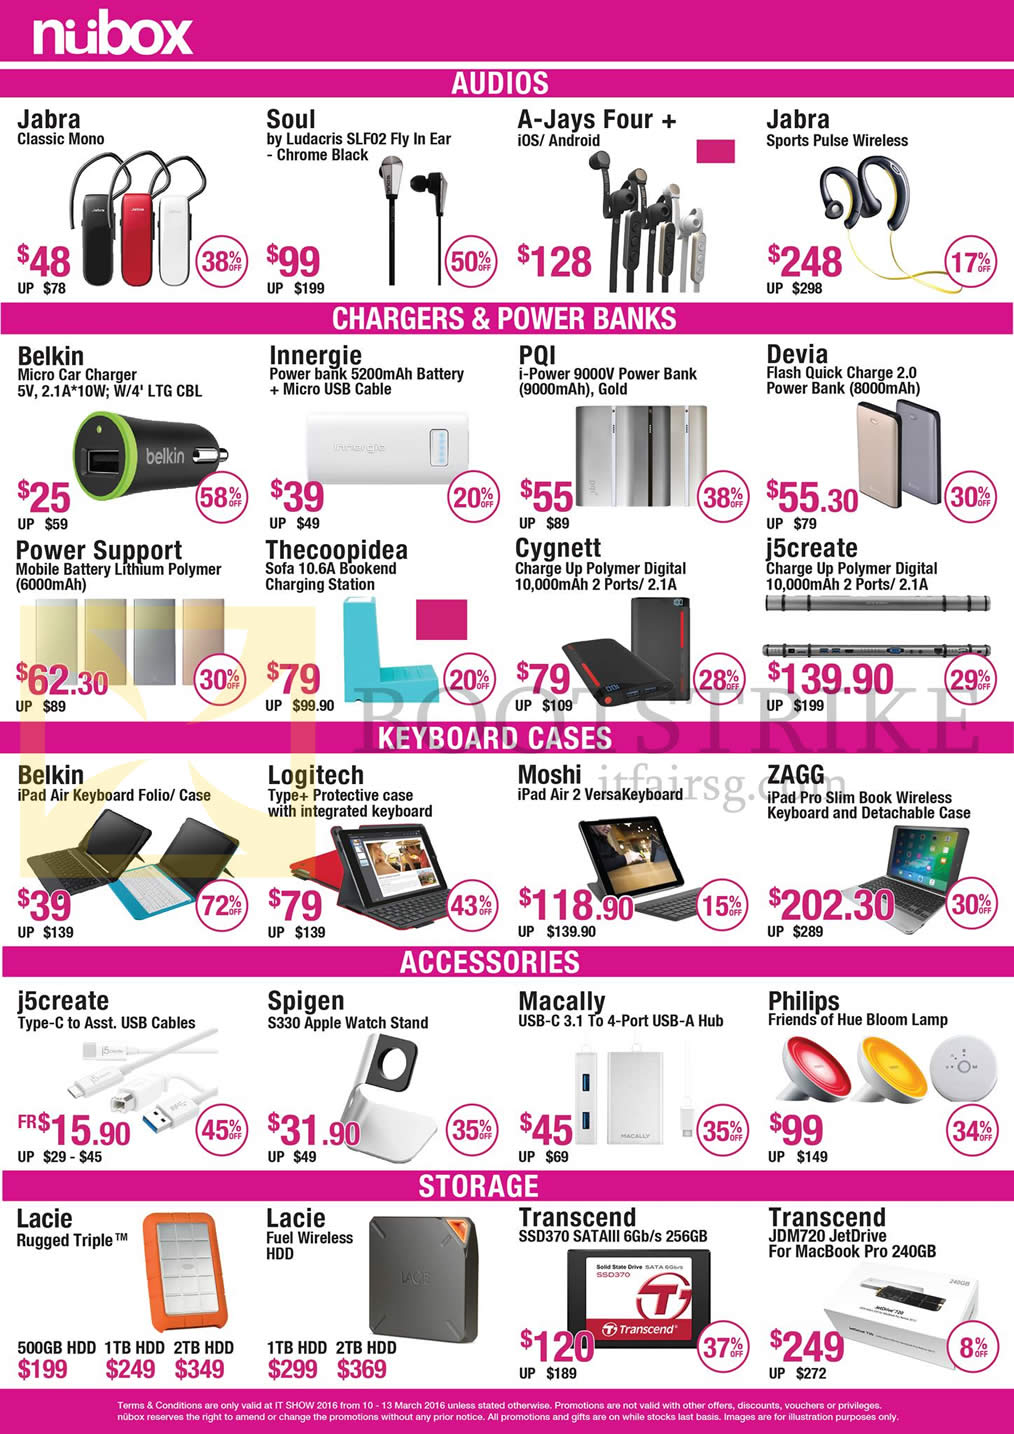 IT SHOW 2016 price list image brochure of Nubox Audios, Chargers, Power Banks, Keyboard Cases, Storage, Jabra, Soul, Logitech, Moshi, Philips, Lacie, Transcend, J5create, Innergie